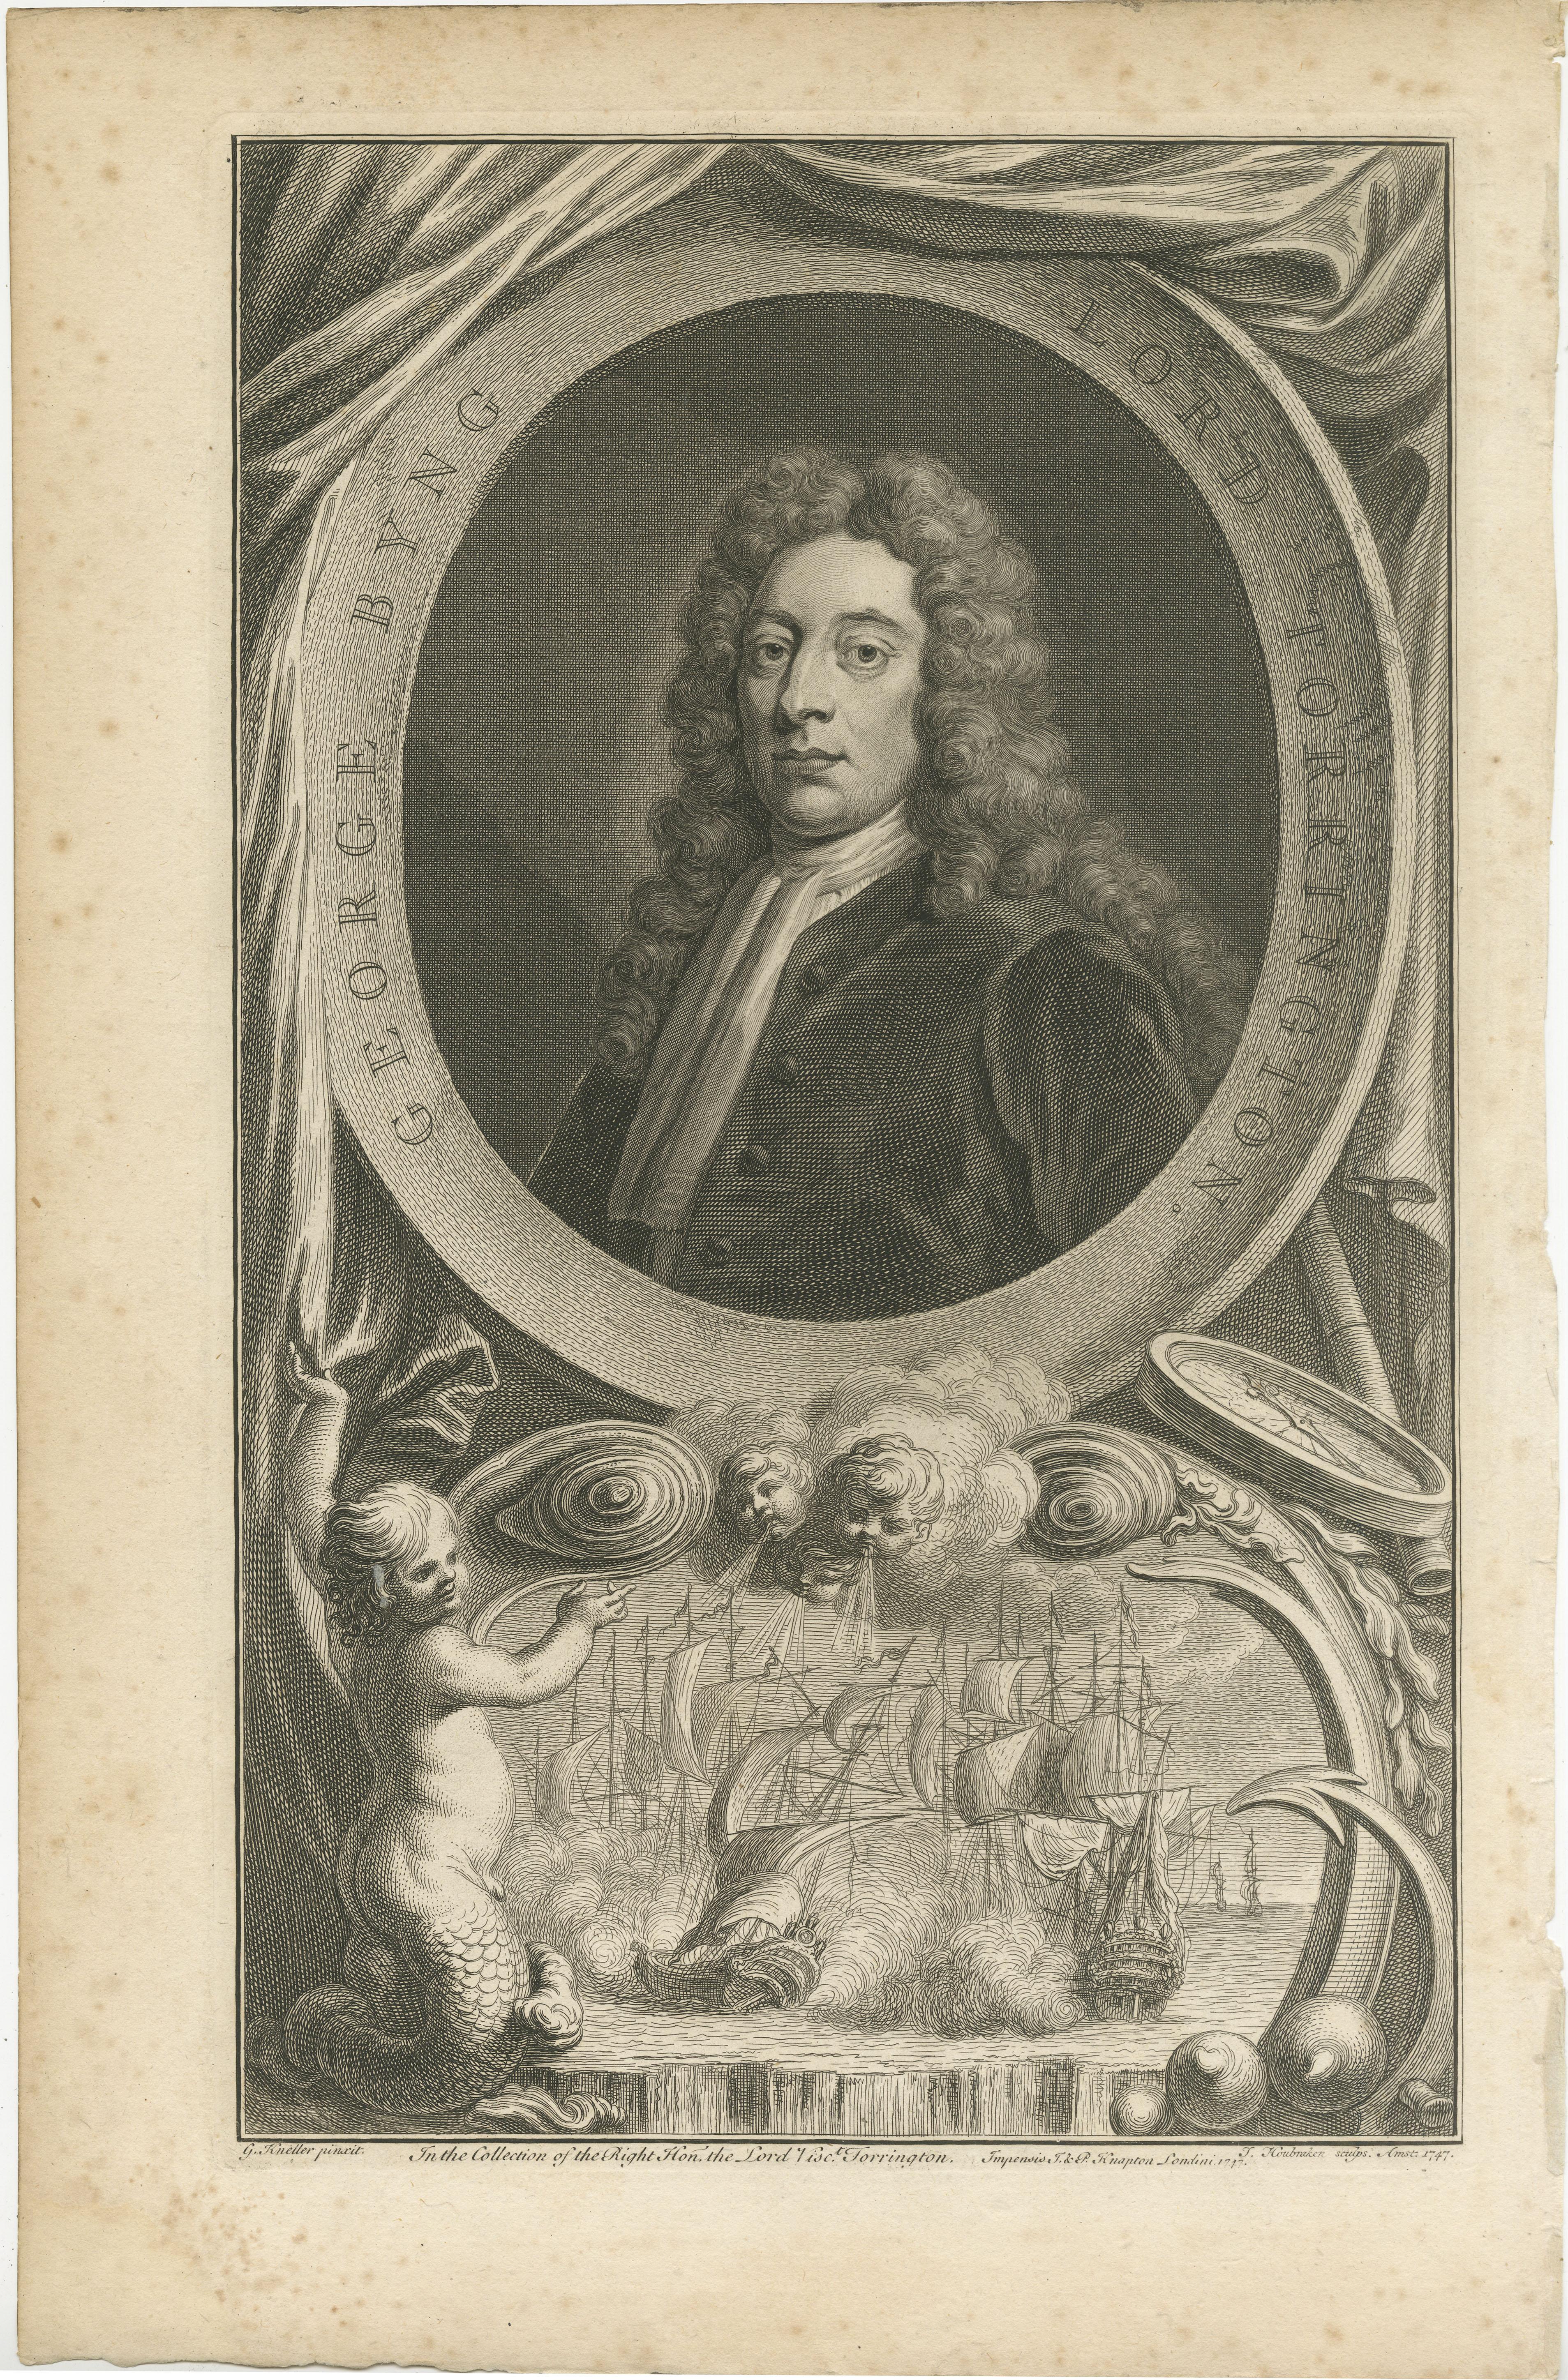 Antique portrait titled 'George Byng Lord Torrington'. Admiral of the Fleet George Byng, 1st Viscount Torrington, KB, PC (27 January 1663 – 17 January 1733), of Southill Park in Bedfordshire, was a Royal Navy officer and statesman. While still a